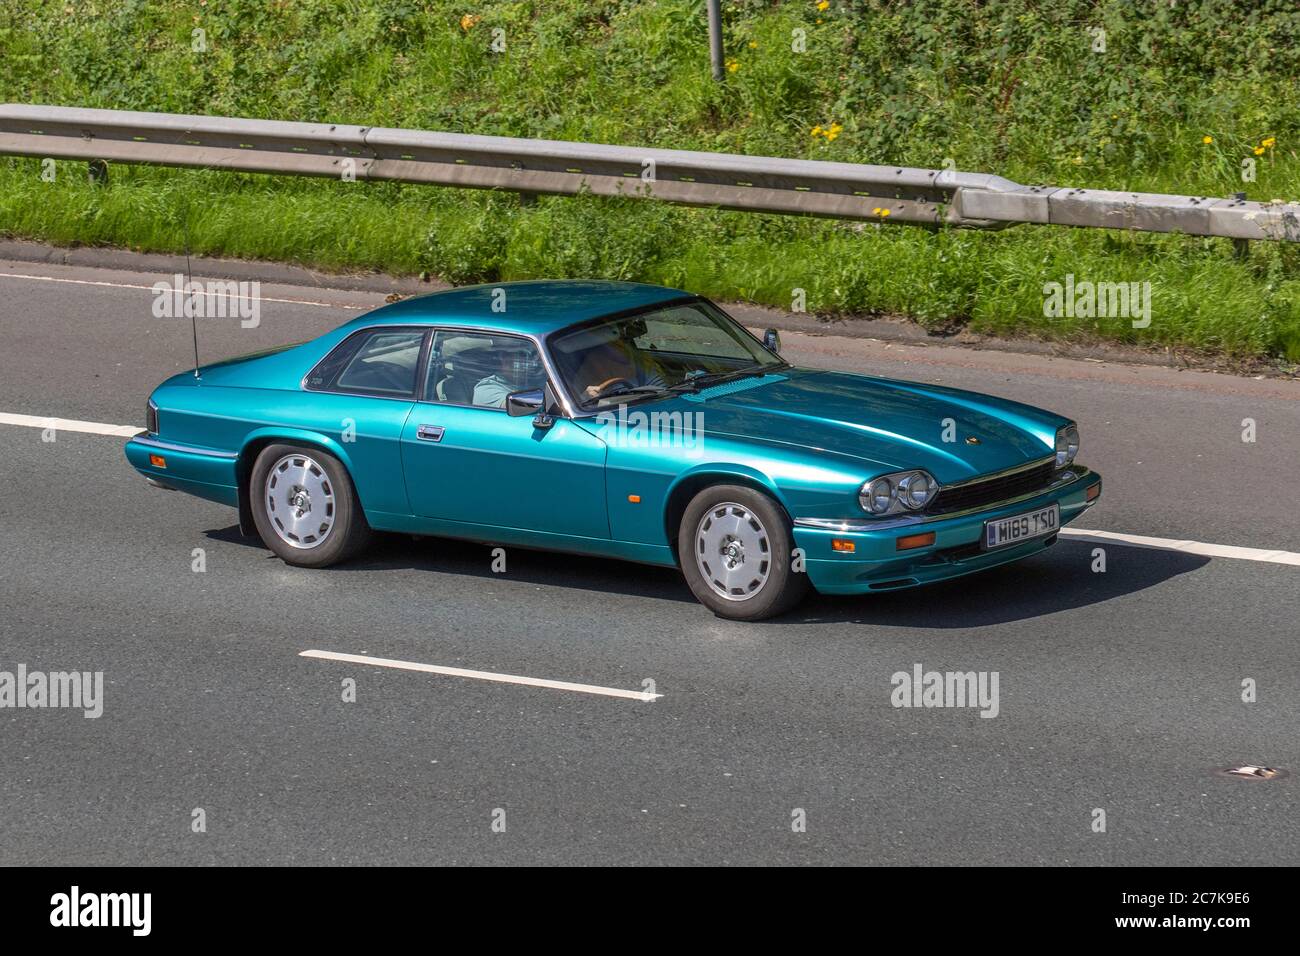 1995 90s Turquoise Jaguar Xj-S 4.0 Auto; Vehicular traffic moving vehicles, cars driving vehicle on UK roads, motors, motoring on the M6 motorway highway network. Stock Photo